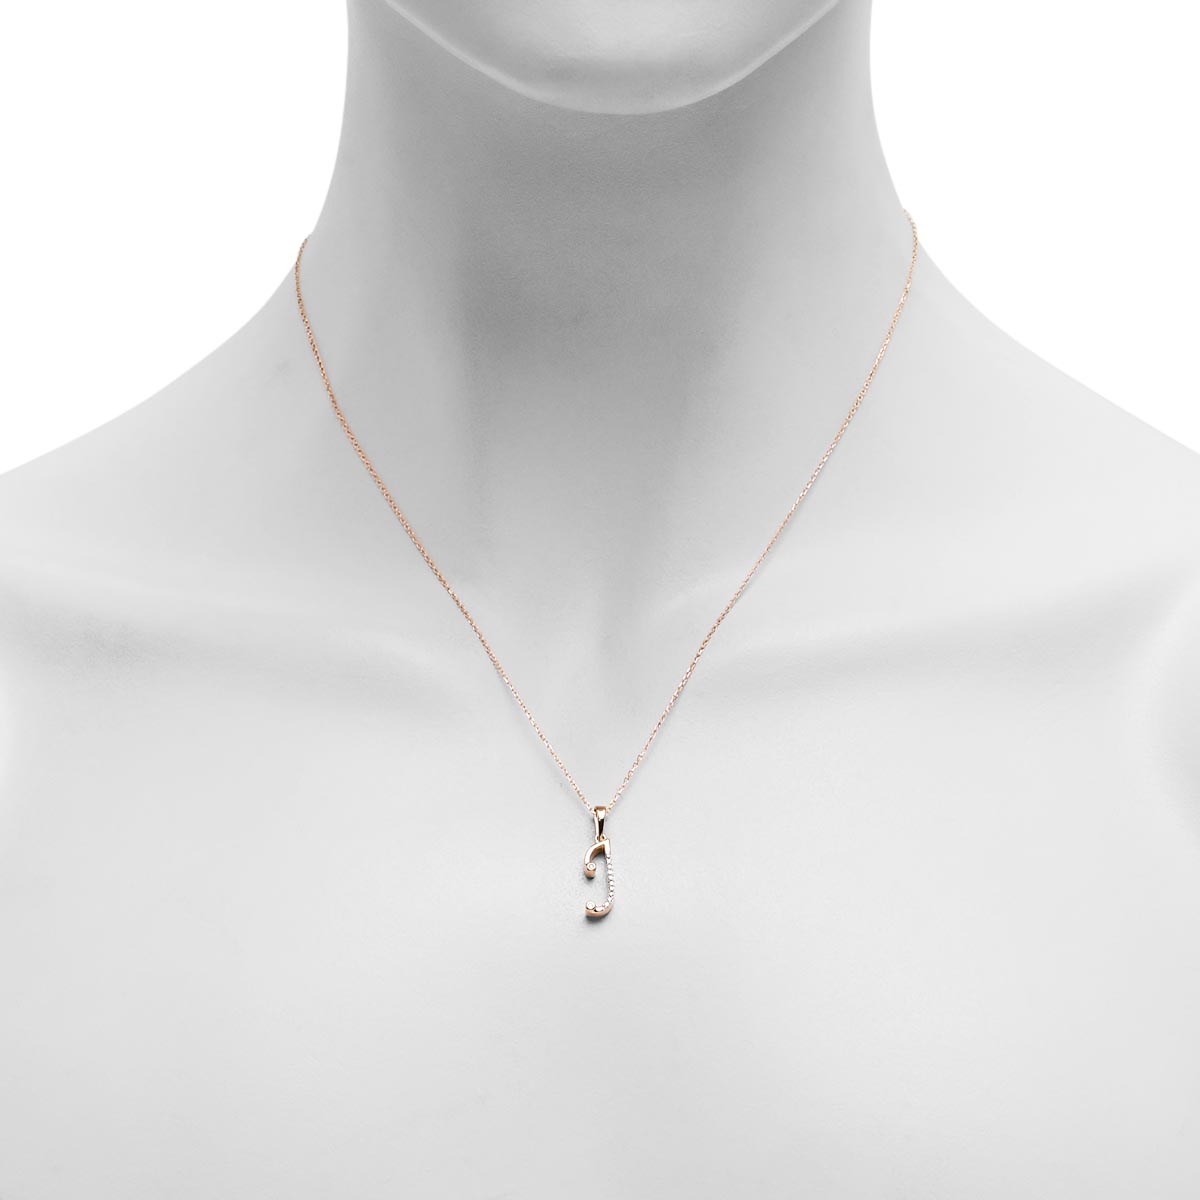 Diamond Initial J Necklace in 10kt Yellow Gold (1/20ct tw)